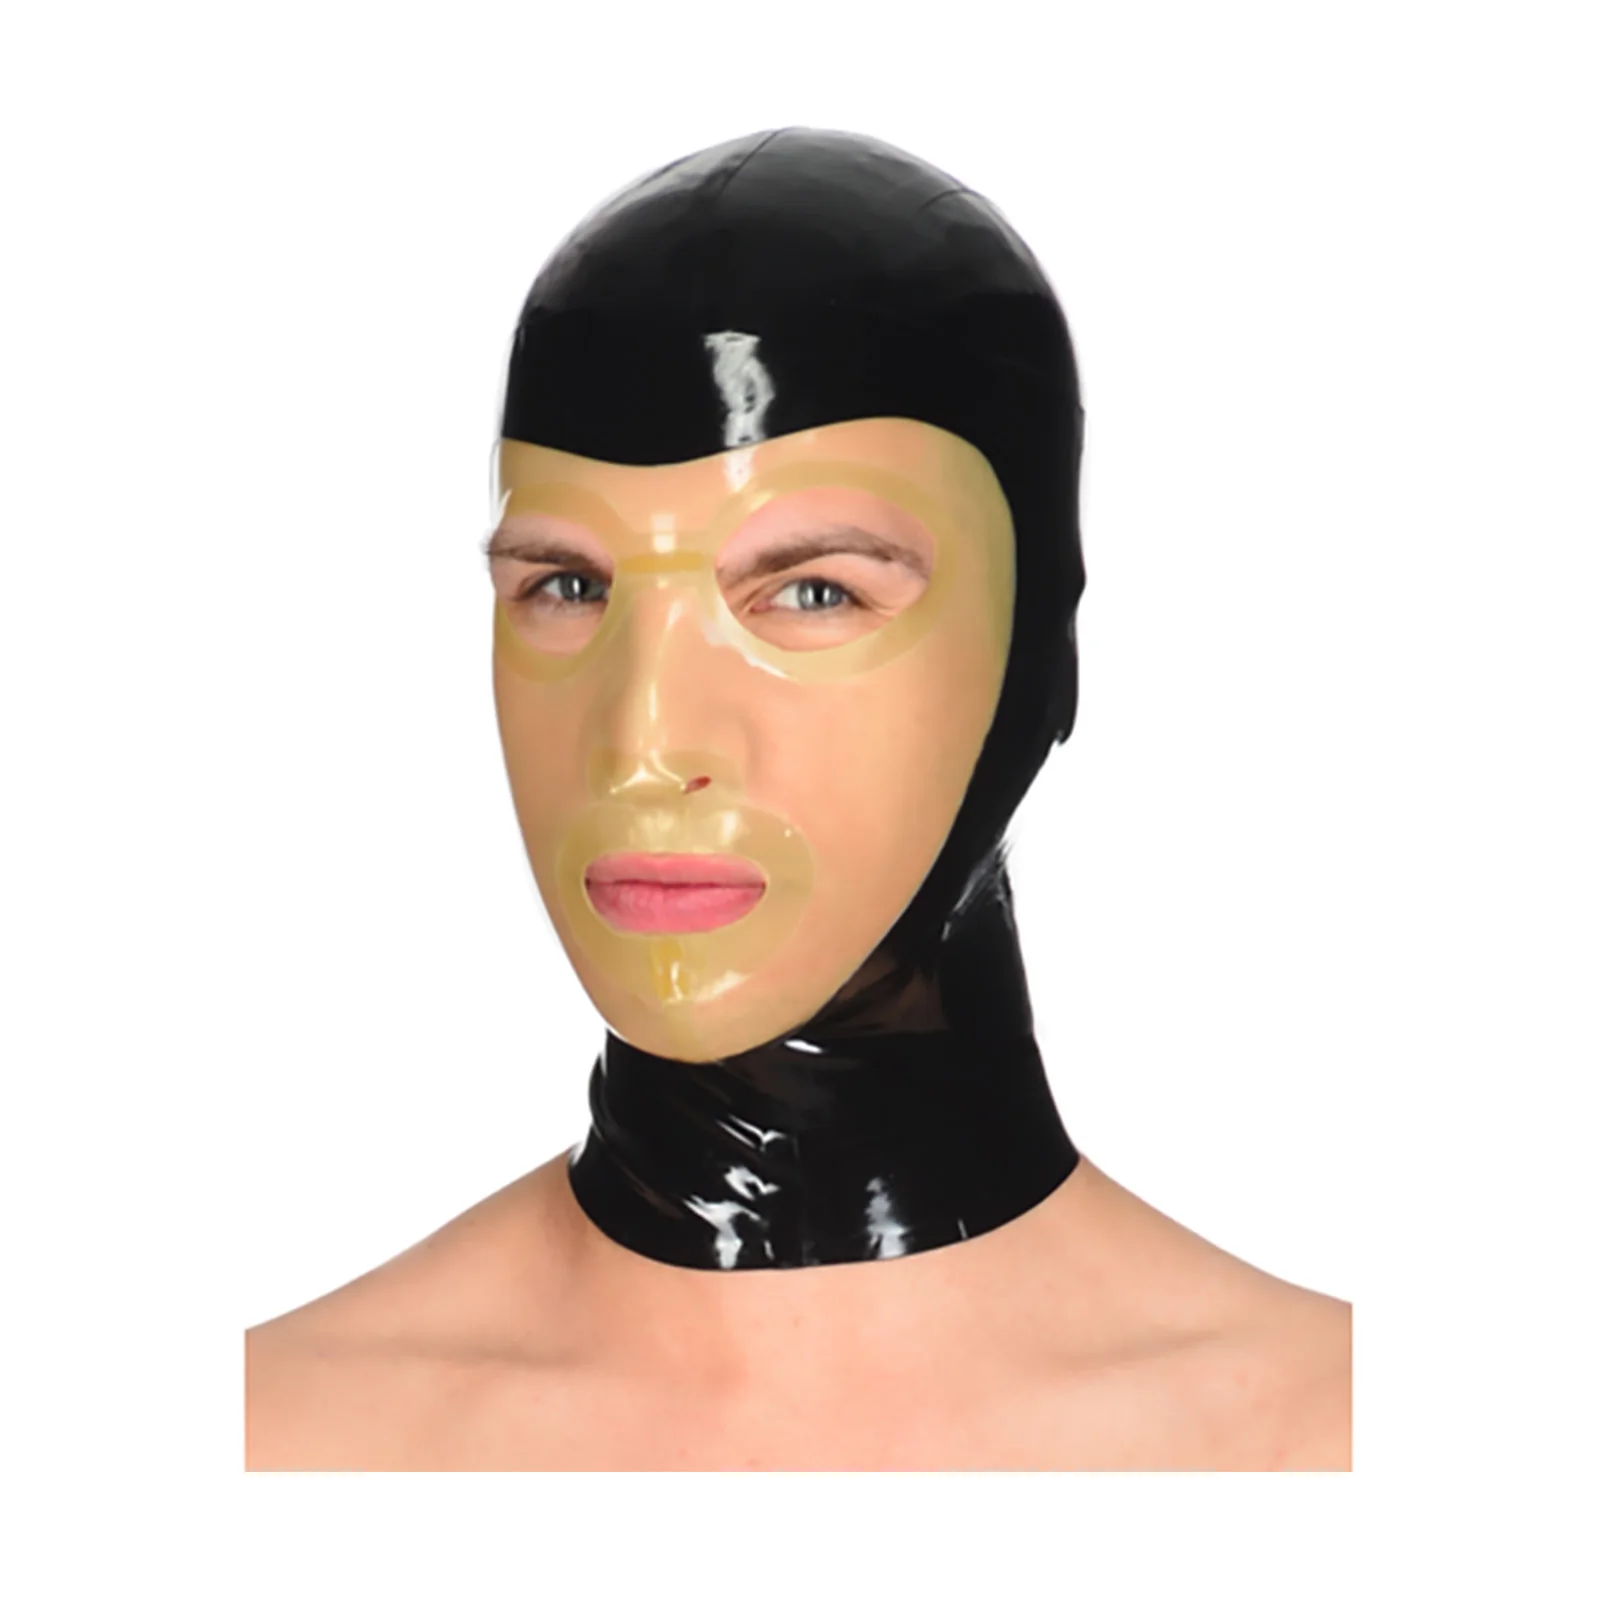 

MONNIK Full Cover Latex Hood Funny Mask Open Eyes&Mouth Black&Transparent with Rear Zipper Handmade for Catsuit Party Cosplay